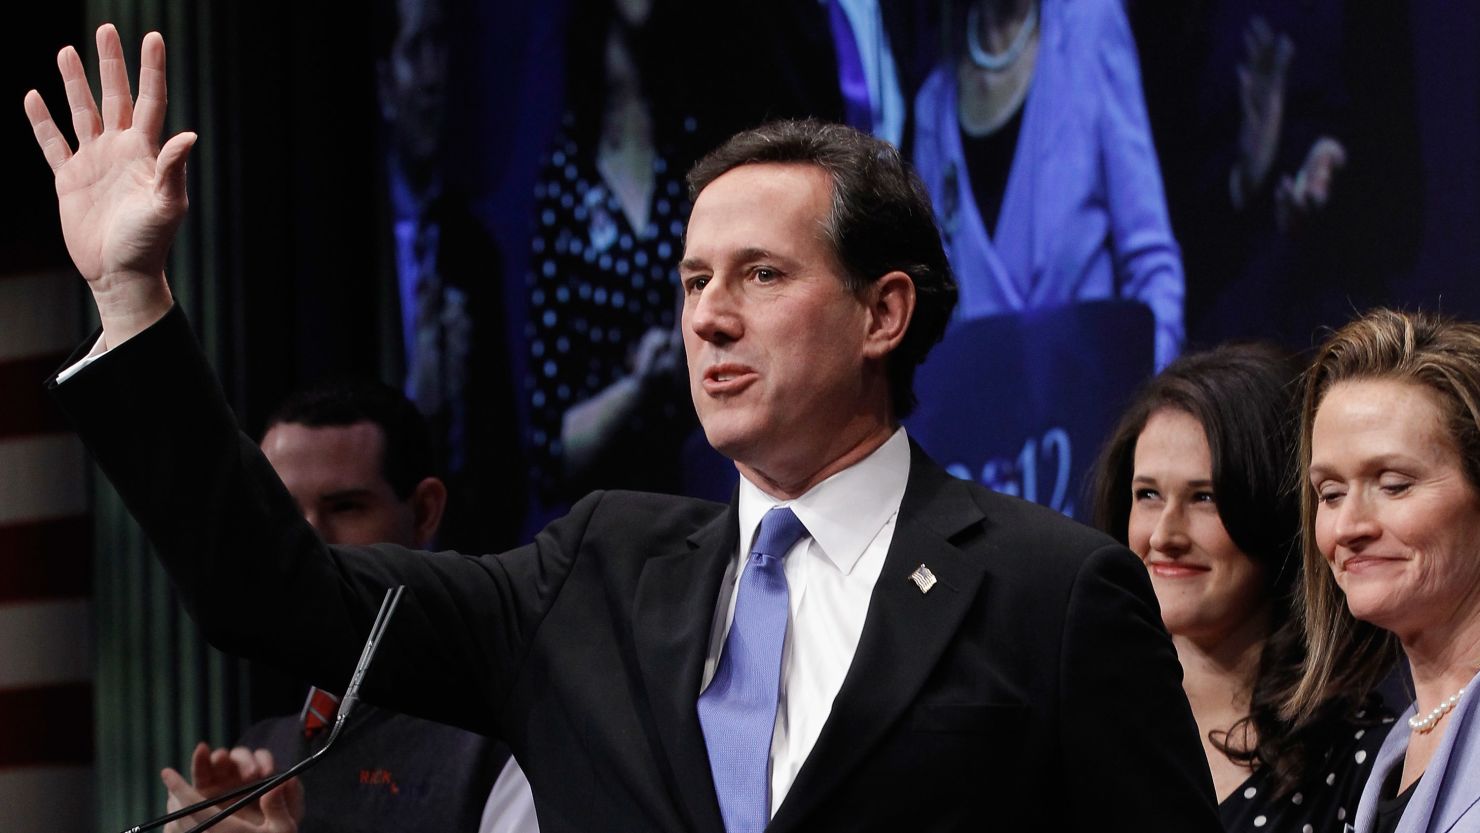  Rick Santorum on stage at the Conservative Political Action Conference (CPAC) in Washington